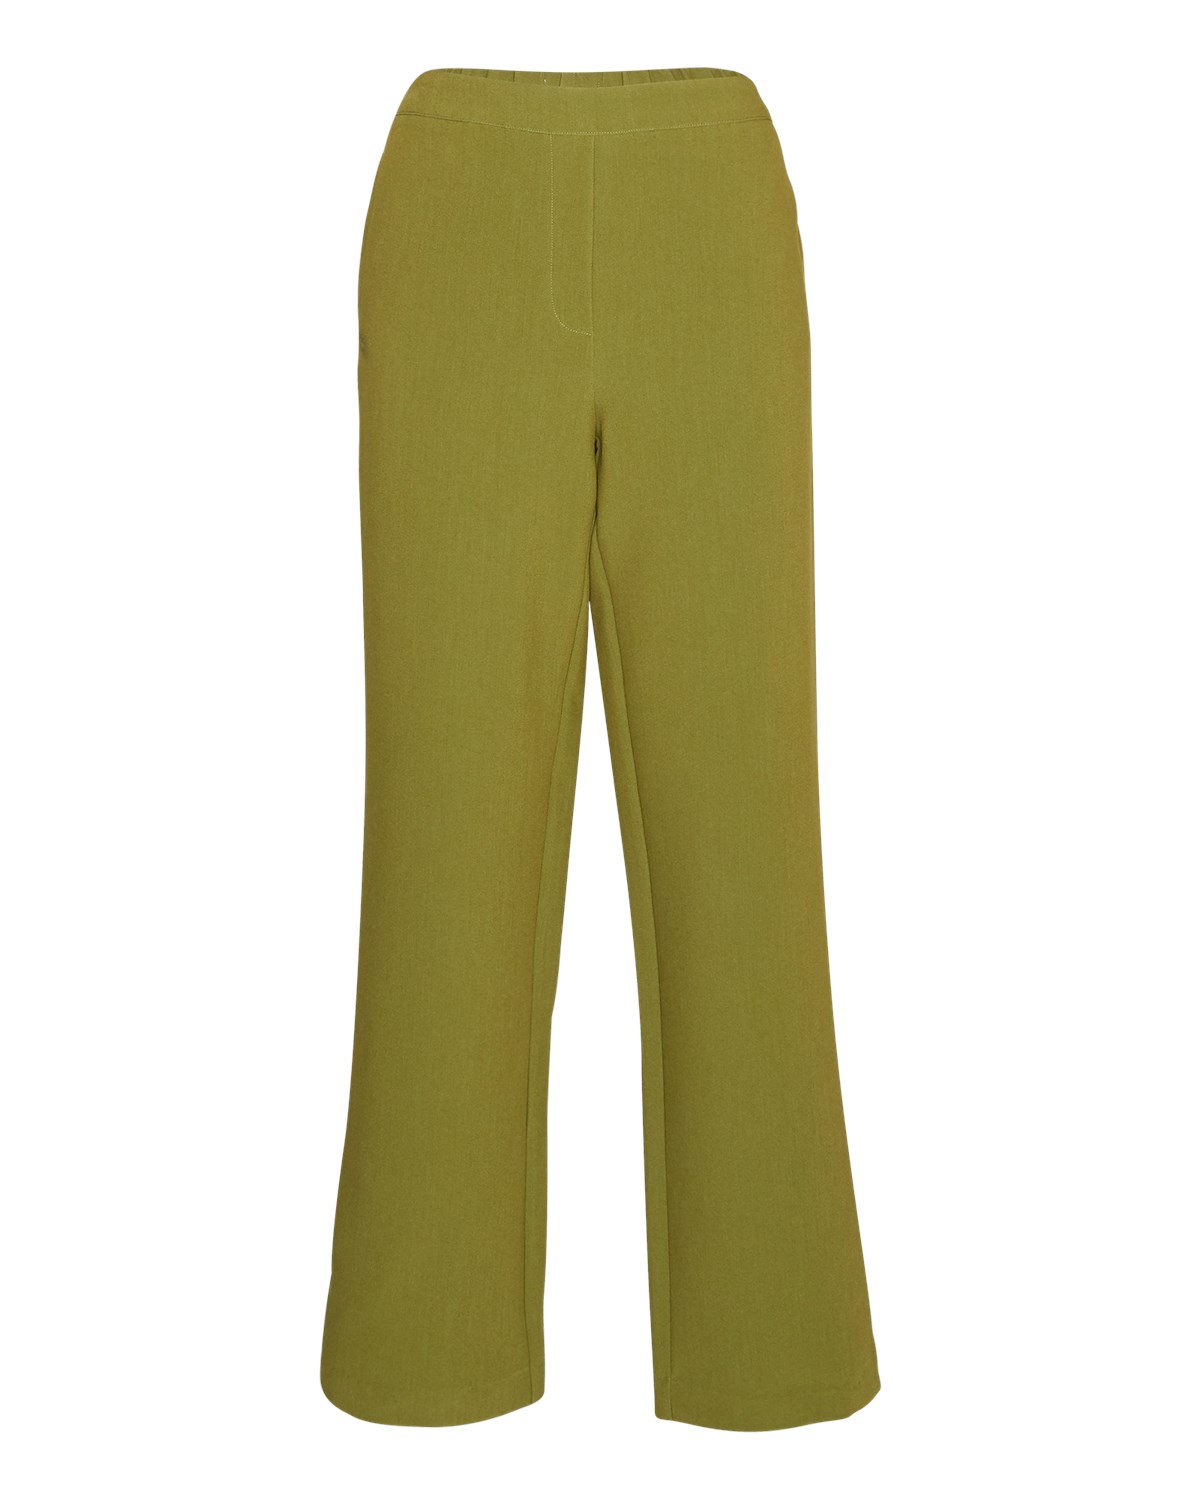 Taira Hedvig Pants item front